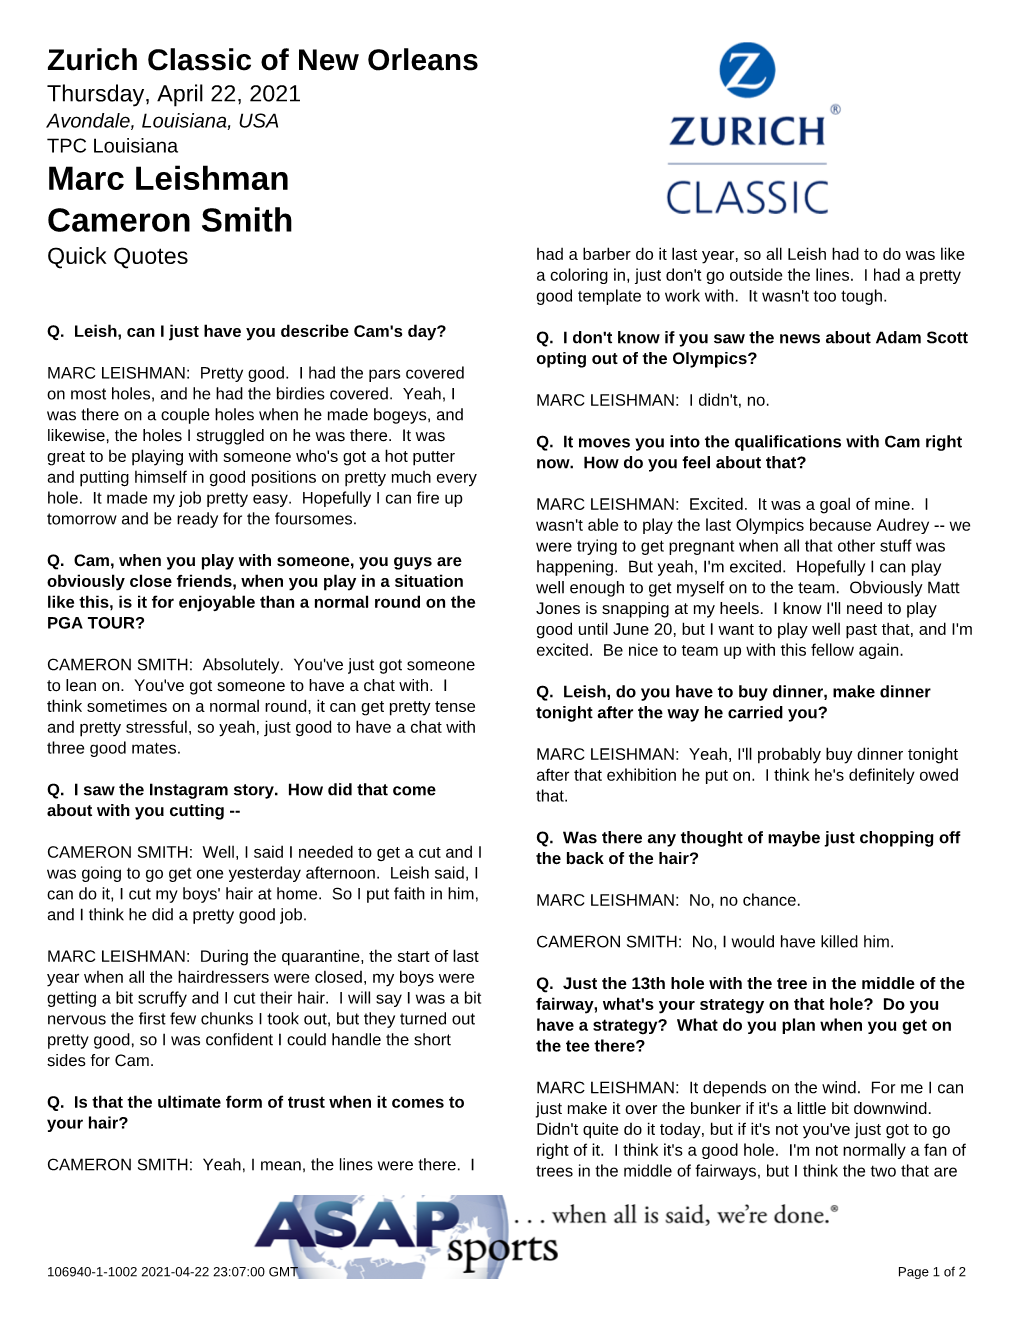 Marc Leishman Cameron Smith Quick Quotes Had a Barber Do It Last Year, So All Leish Had to Do Was Like a Coloring In, Just Don't Go Outside the Lines